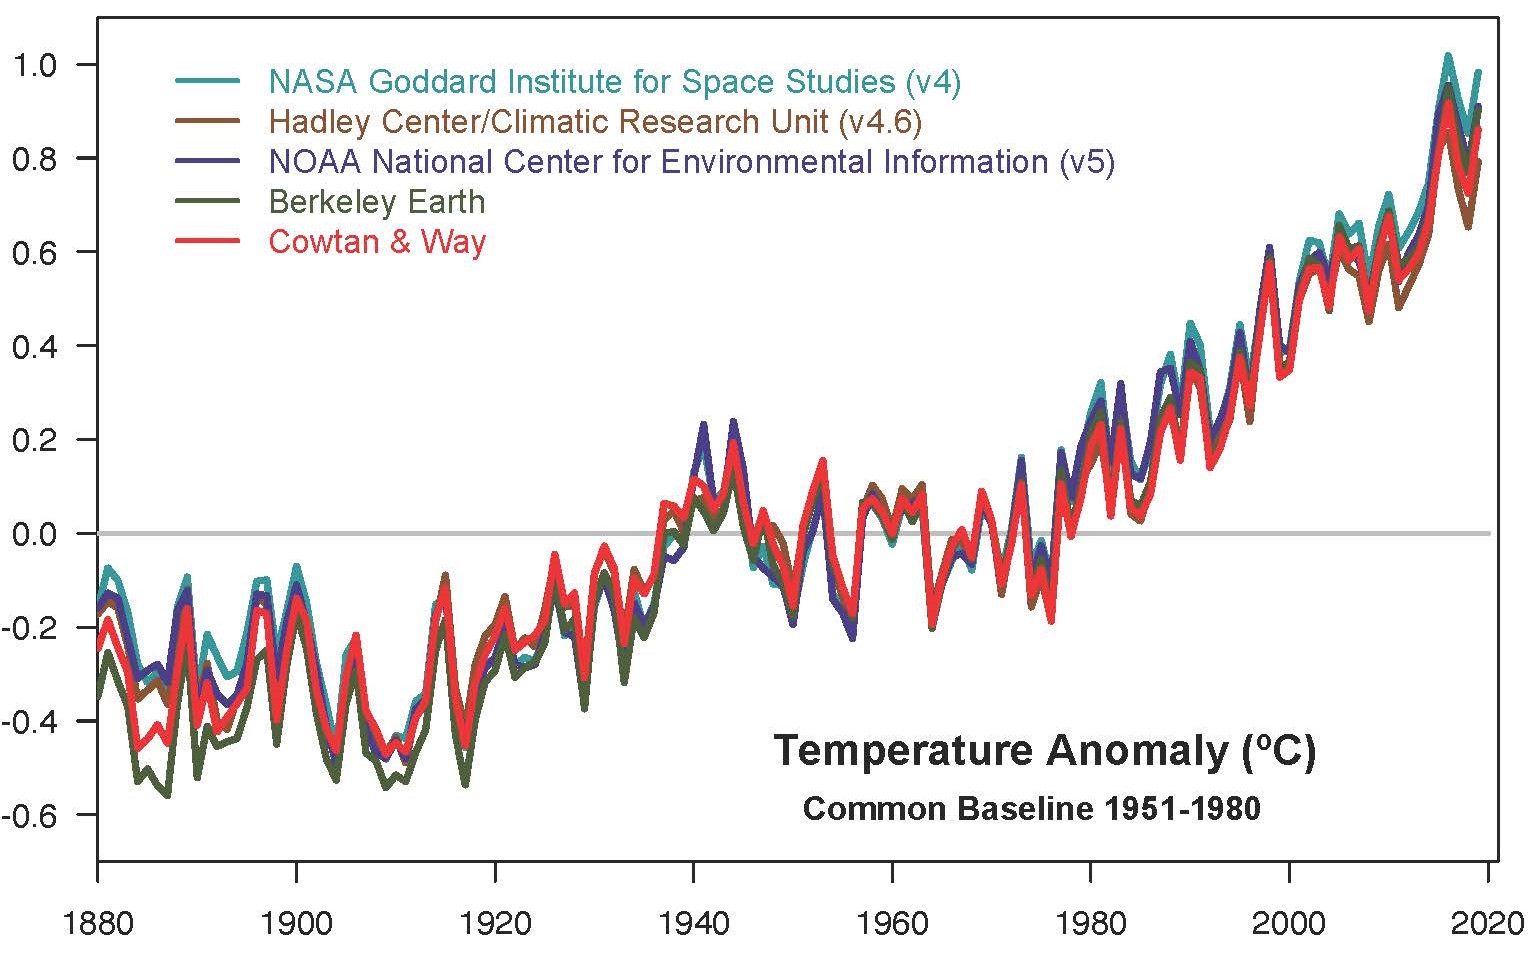 This plot shows yearly temperature anomalies from 1880 to 2019, with respect to the 1951-1980 mean